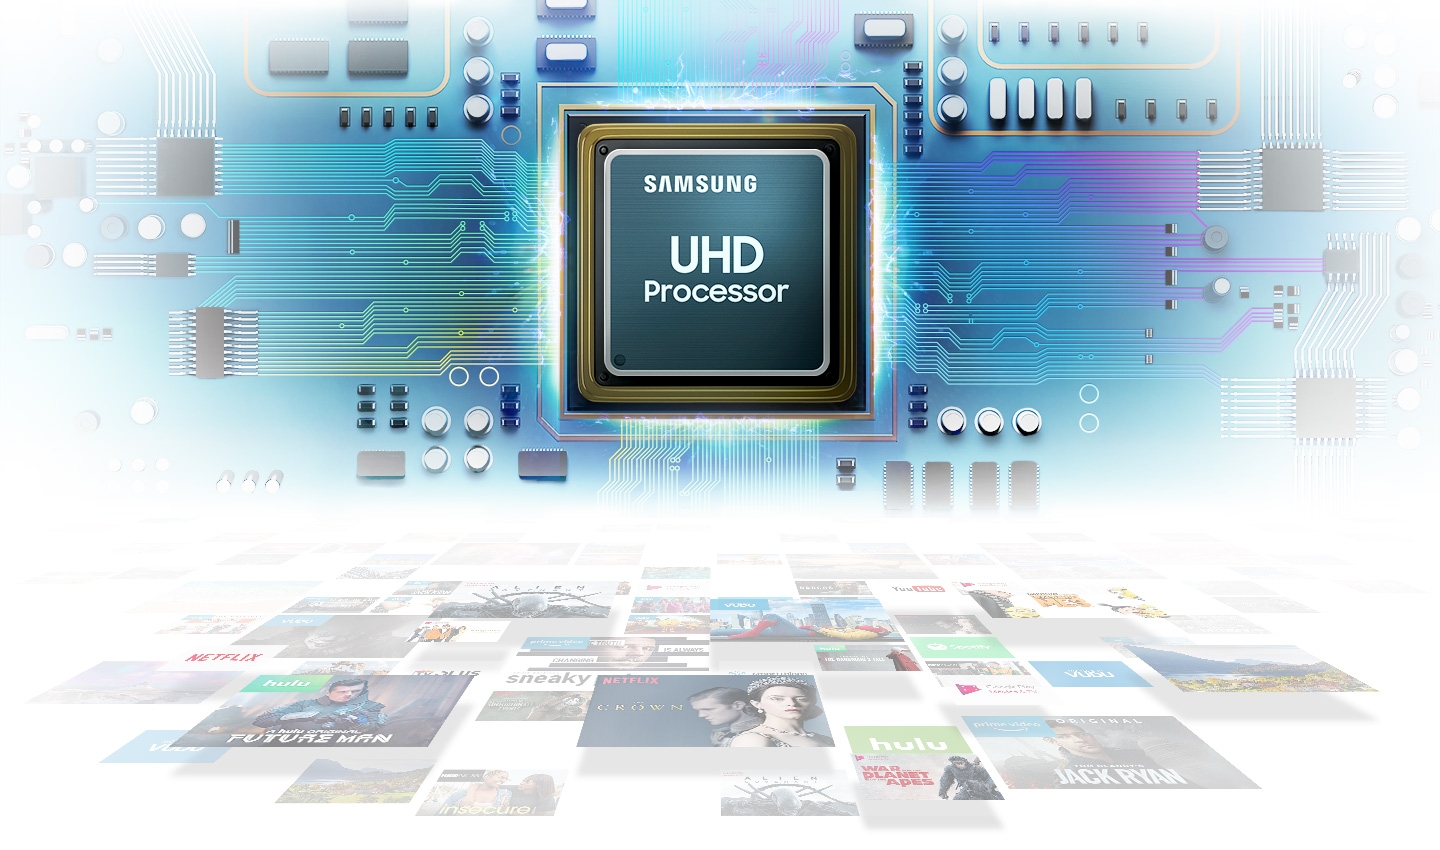 UHD Processor,powerful picture quality